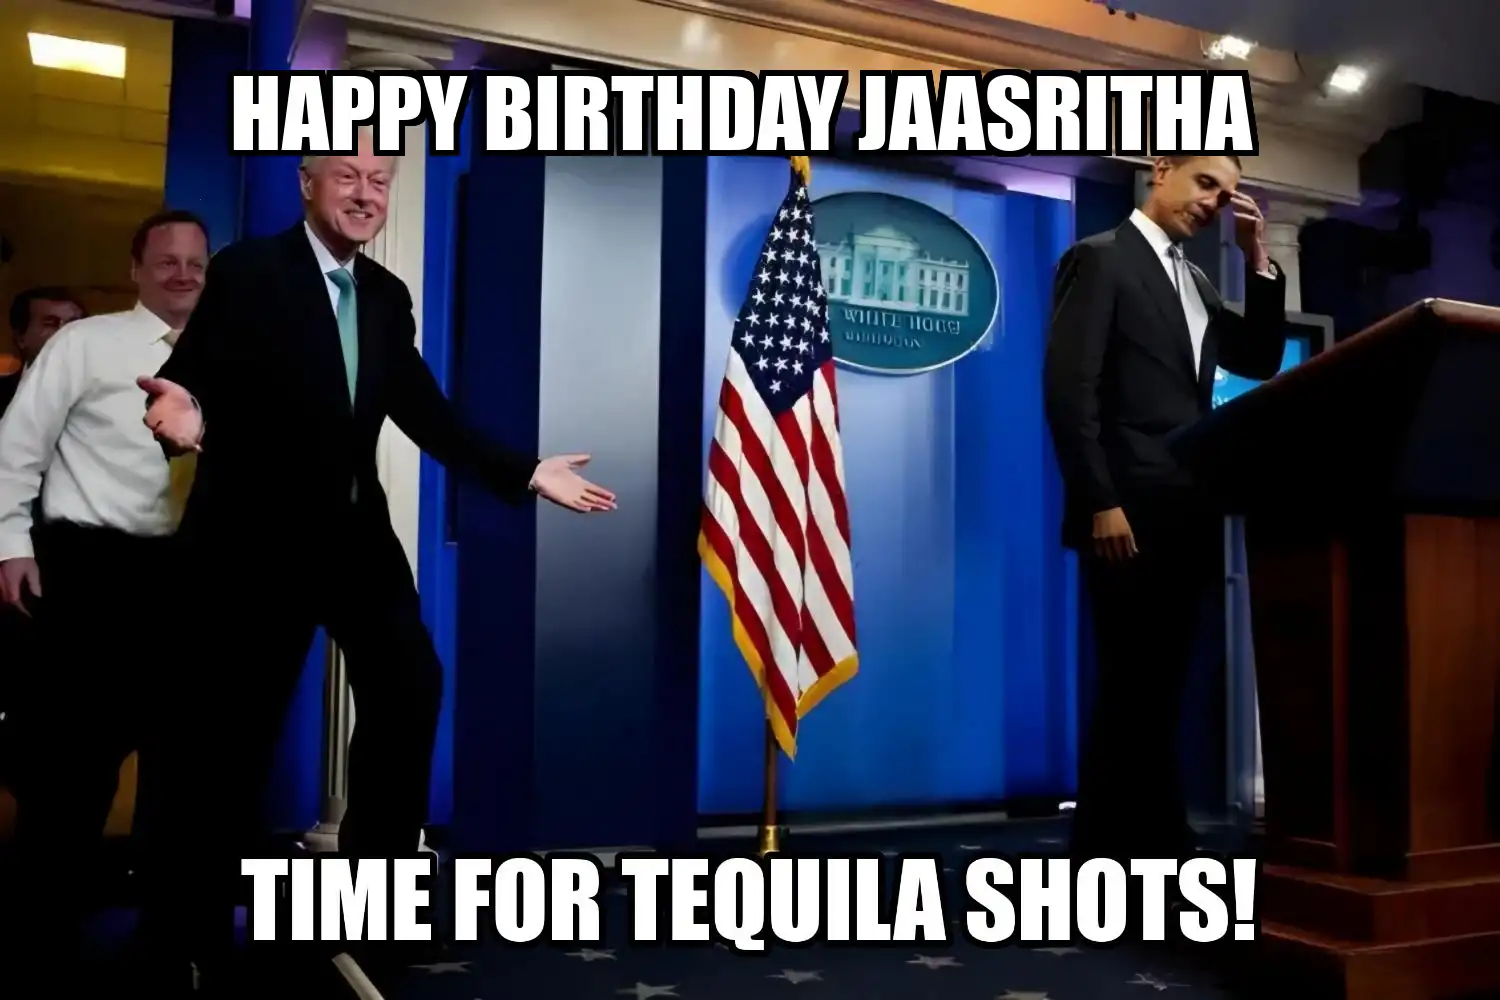 Happy Birthday Jaasritha Time For Tequila Shots Memes